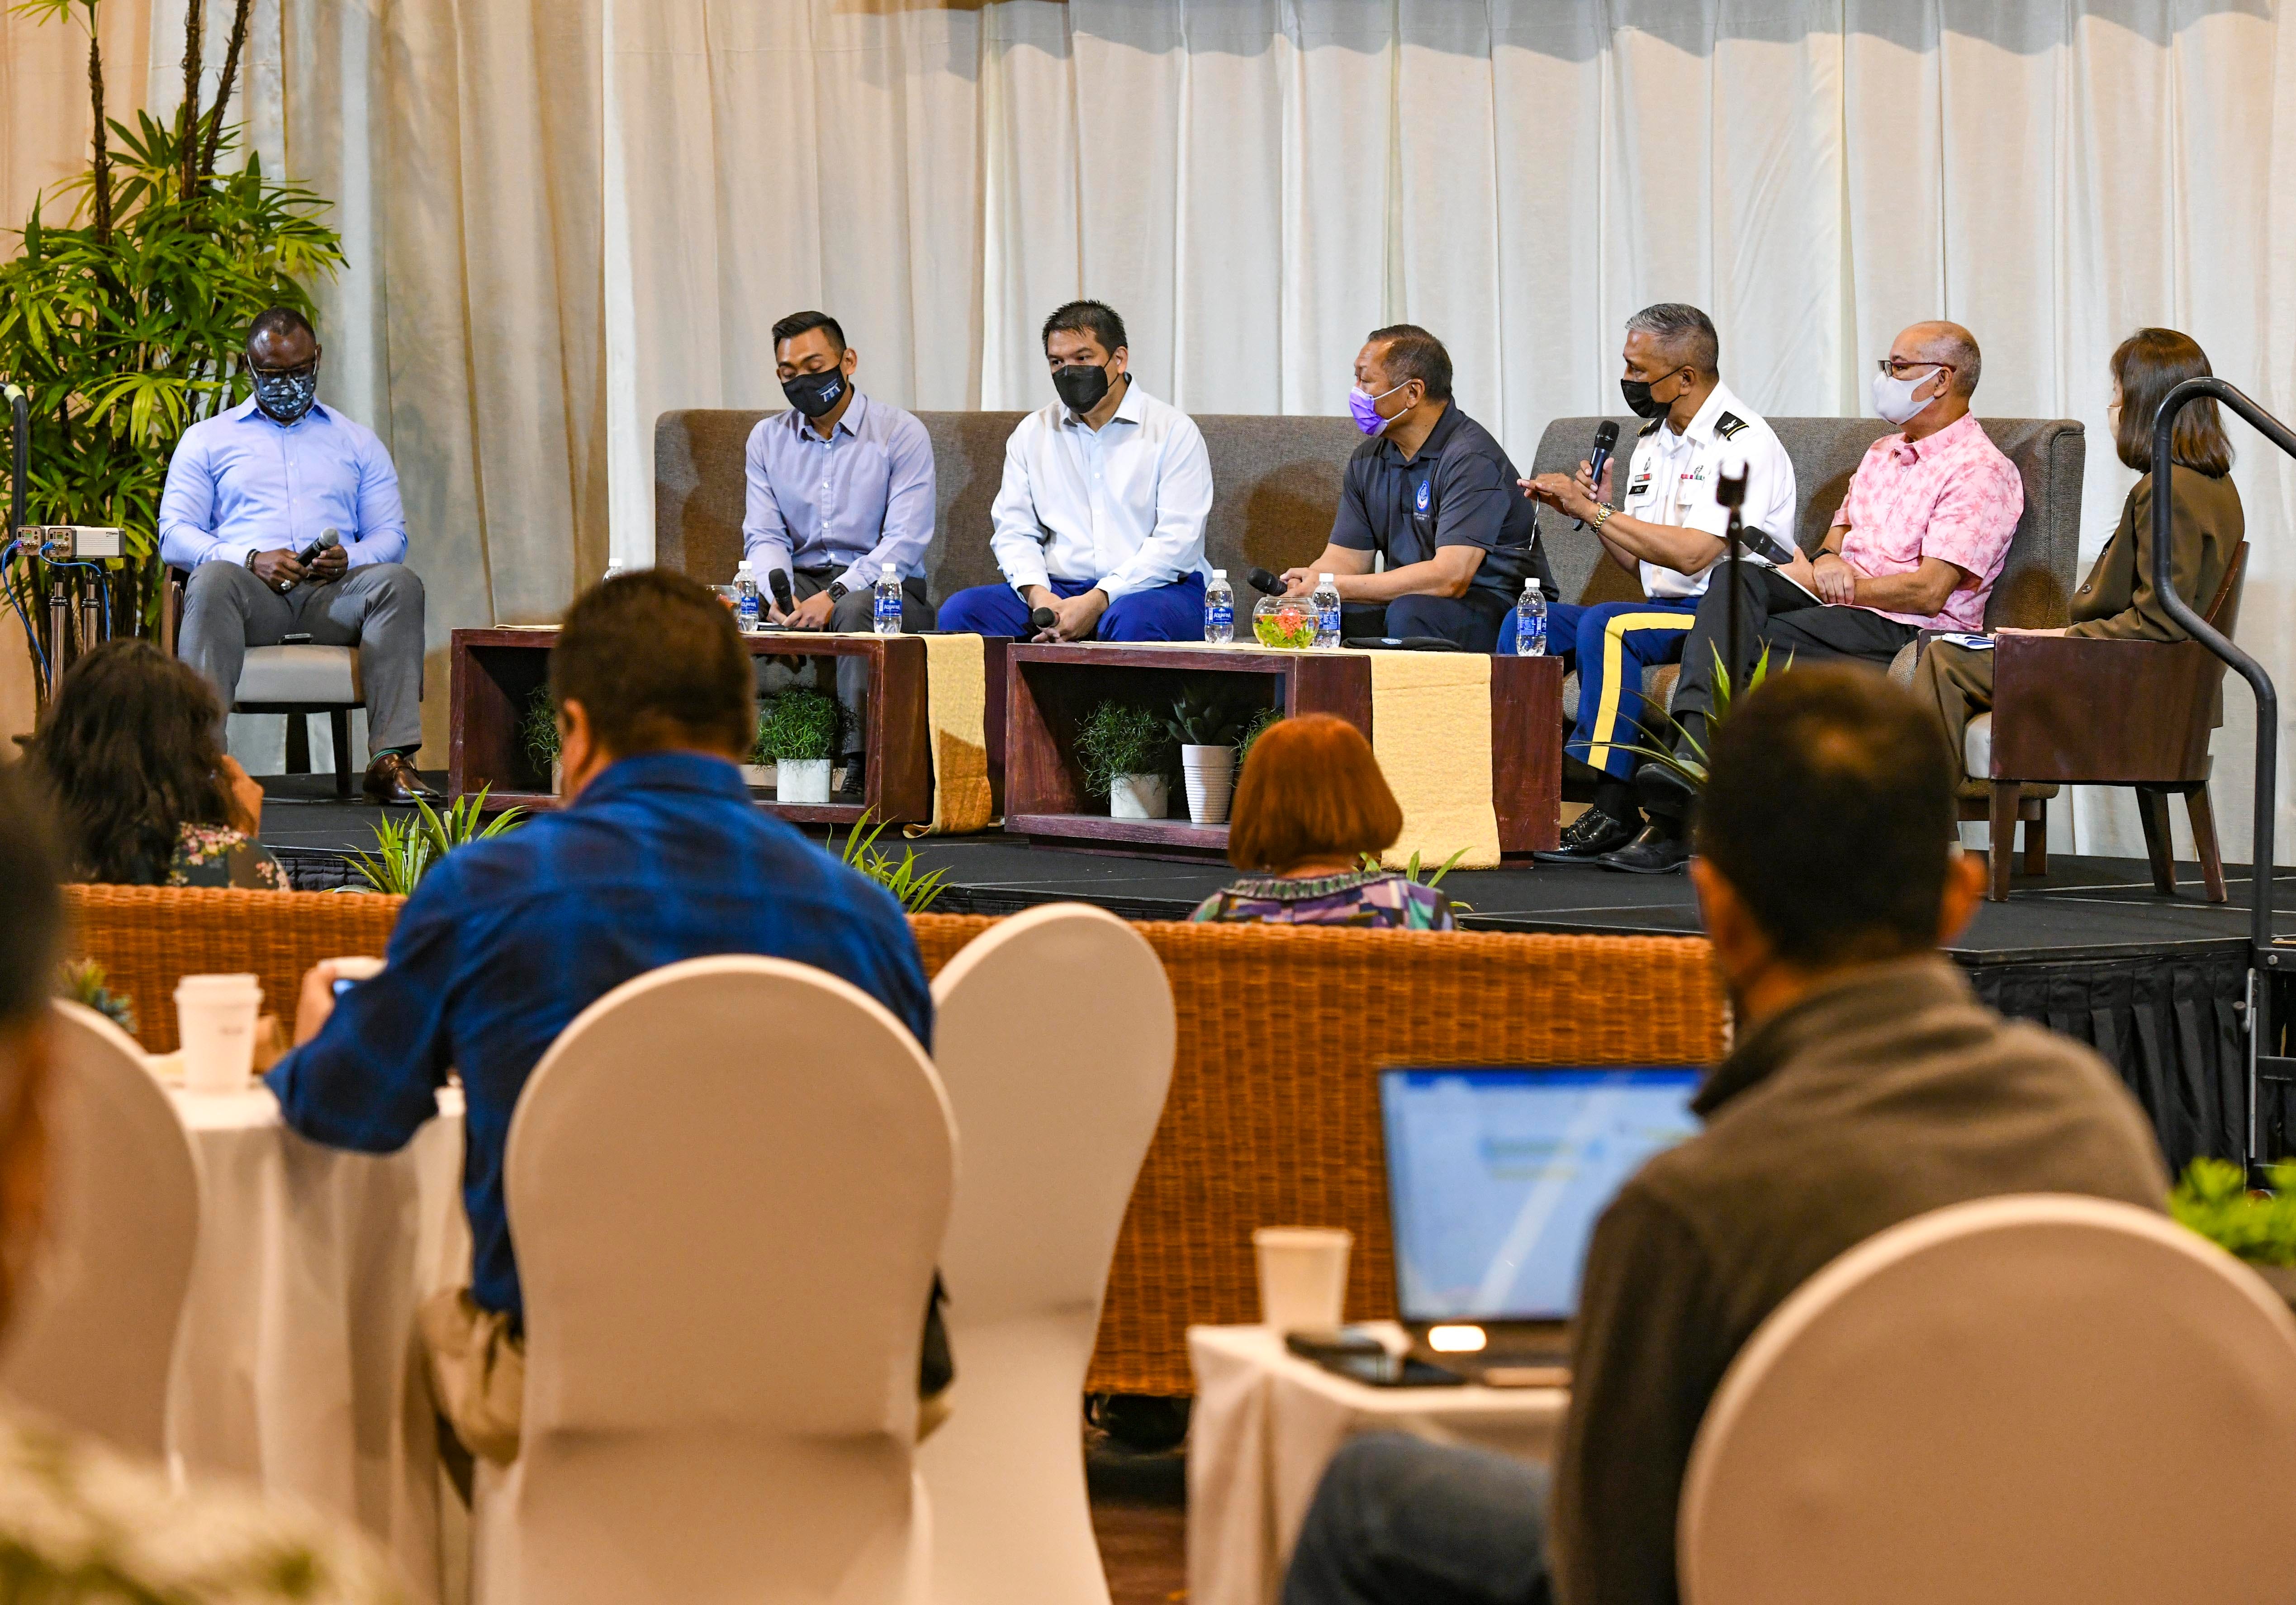 The first round of panelists gather on stage to discuss the possibility of reopening of the island to tourism during the Guam Hotel & Restaurant Association's Economic Forum conducted at the Hyatt Regency Guam in Tumon on Thursday, June 24, 2021.